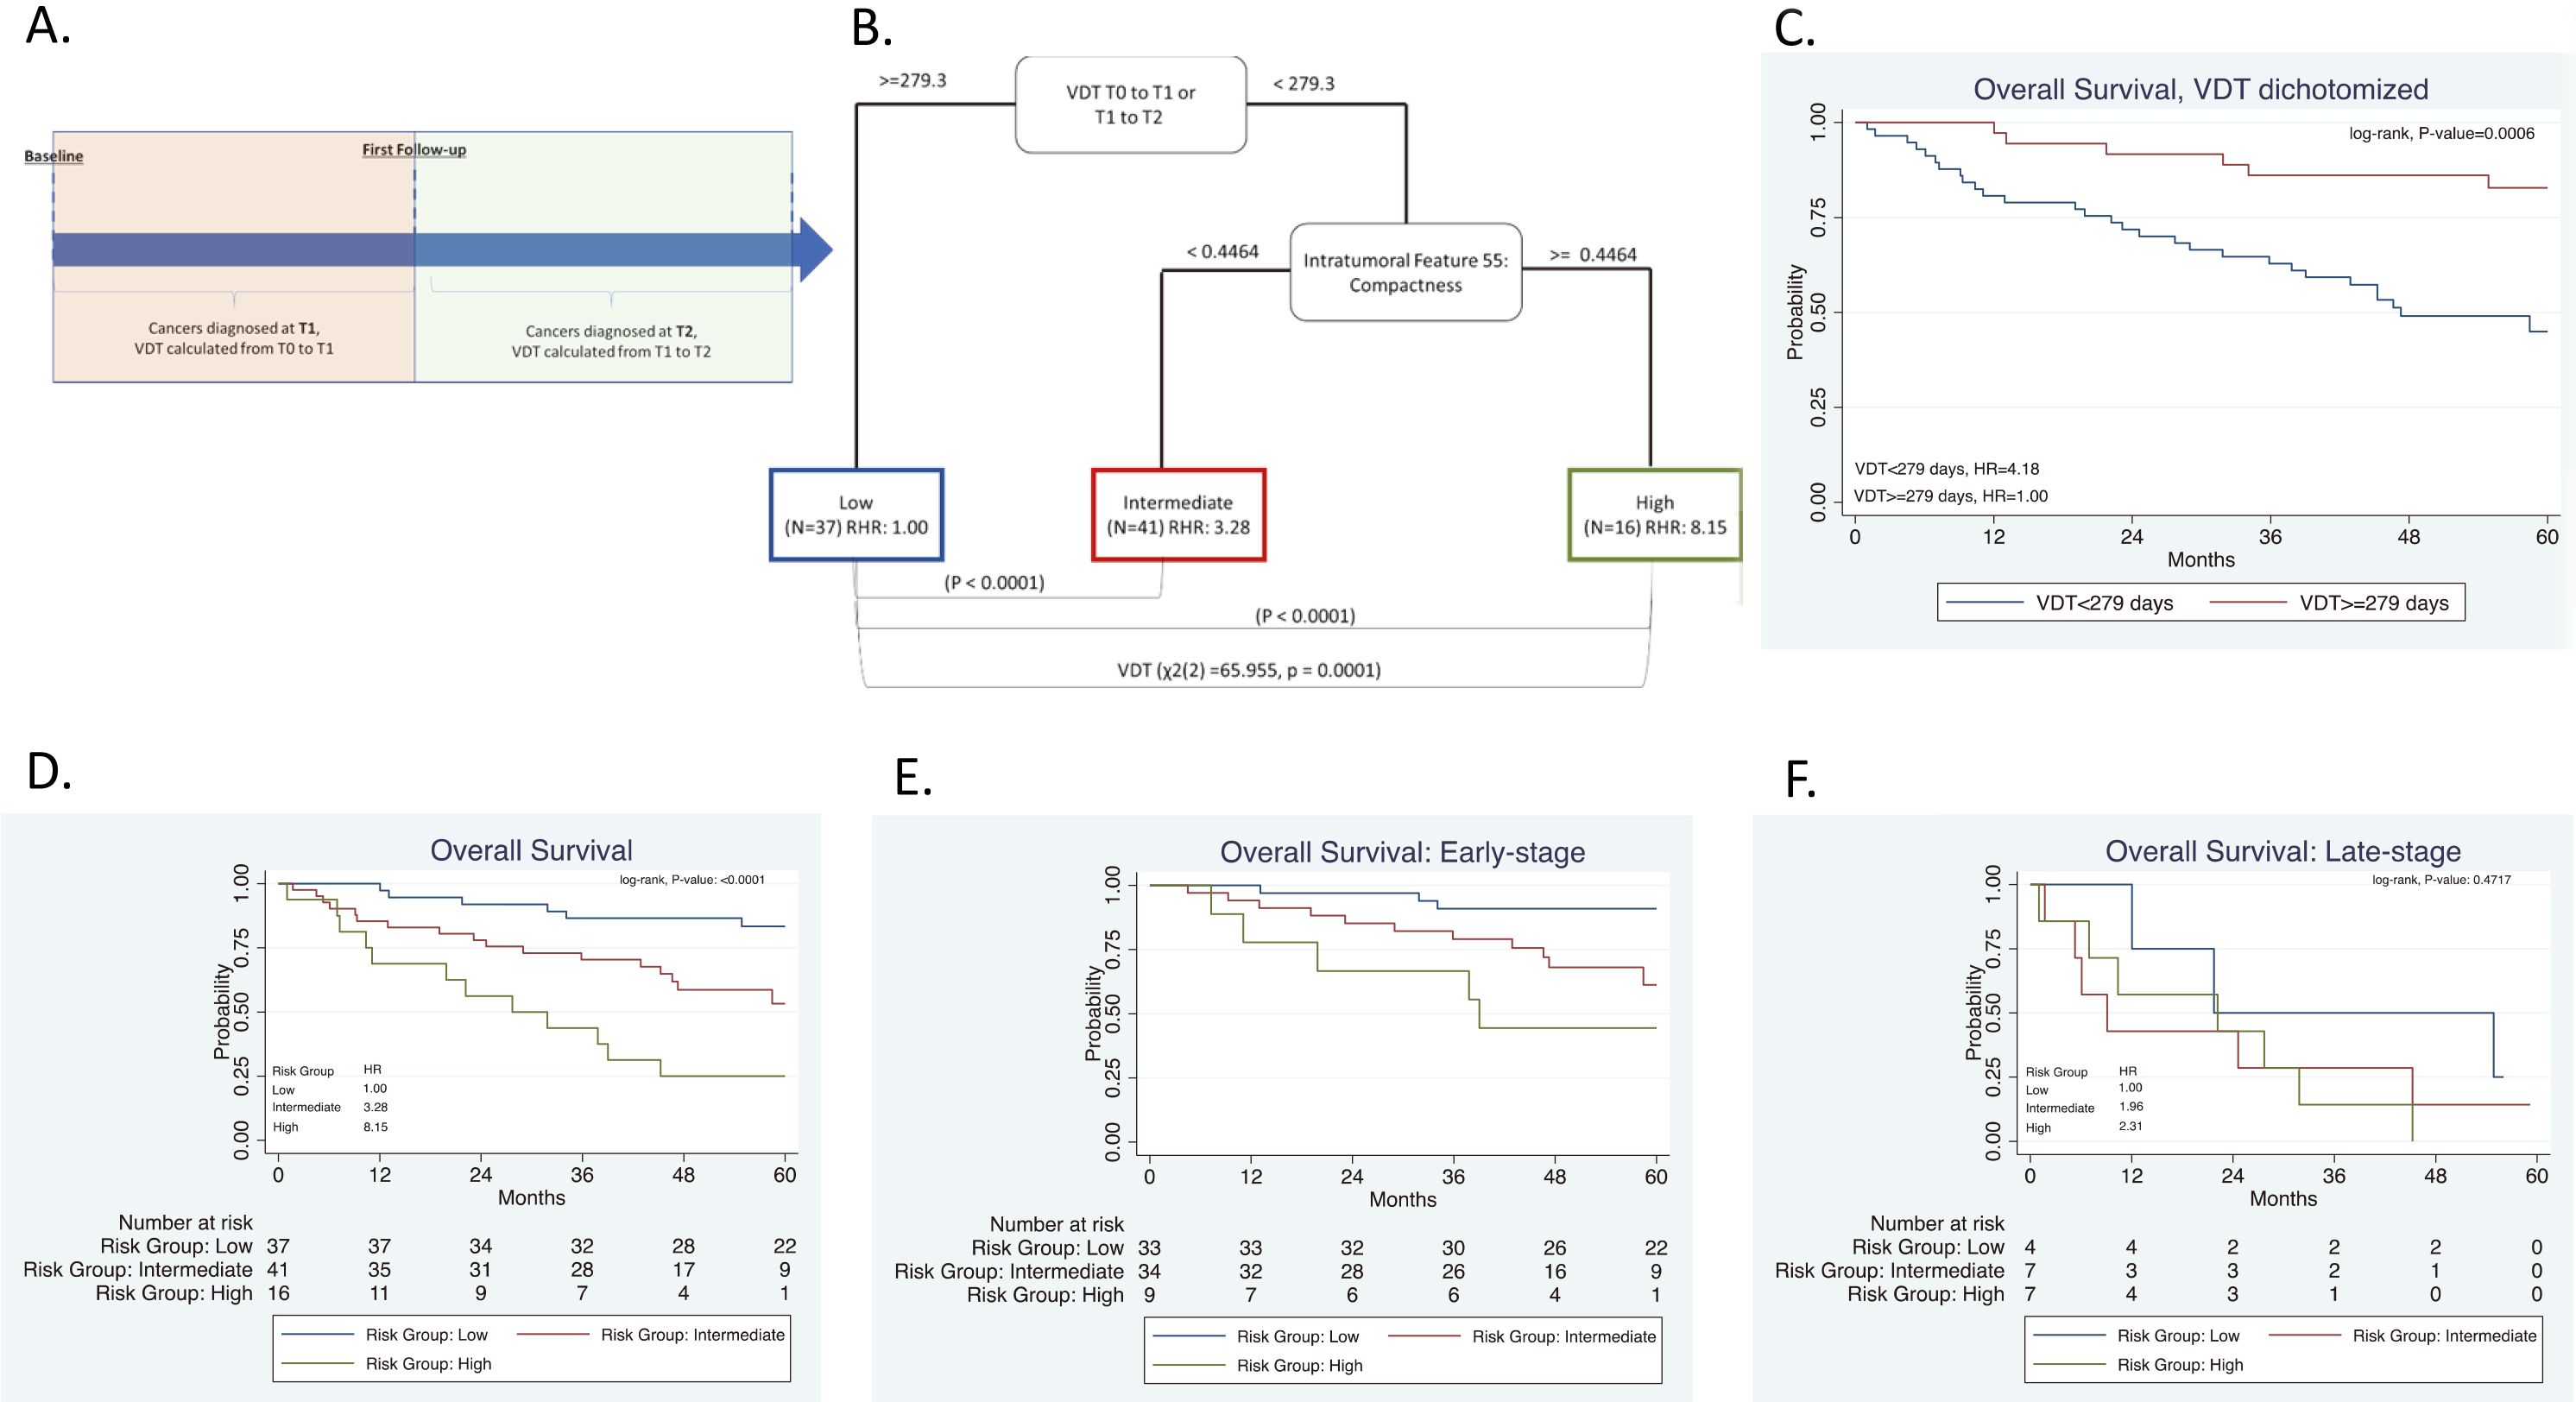 Risk-groups associated with overall survival for all patients and among early-stage patients diagnosed in the screening interval T0 to T1 or T1 to T2. (A) Schema including patients diagnosed in the screening interval T1 to T2. (B) The tree structure from the classification and regression tree analysis (CART) identified three risk groups based on one radiomics feature and VDT. VDT was statistically significant different between high- and intermediate risk groups when compared to low-risk group. (C) Overall survival for VDT dichotomized by 279 days. Overall survival for the risk patient risk groups among all patients (D) and for early-stage (E), and for late-stage patients (F).